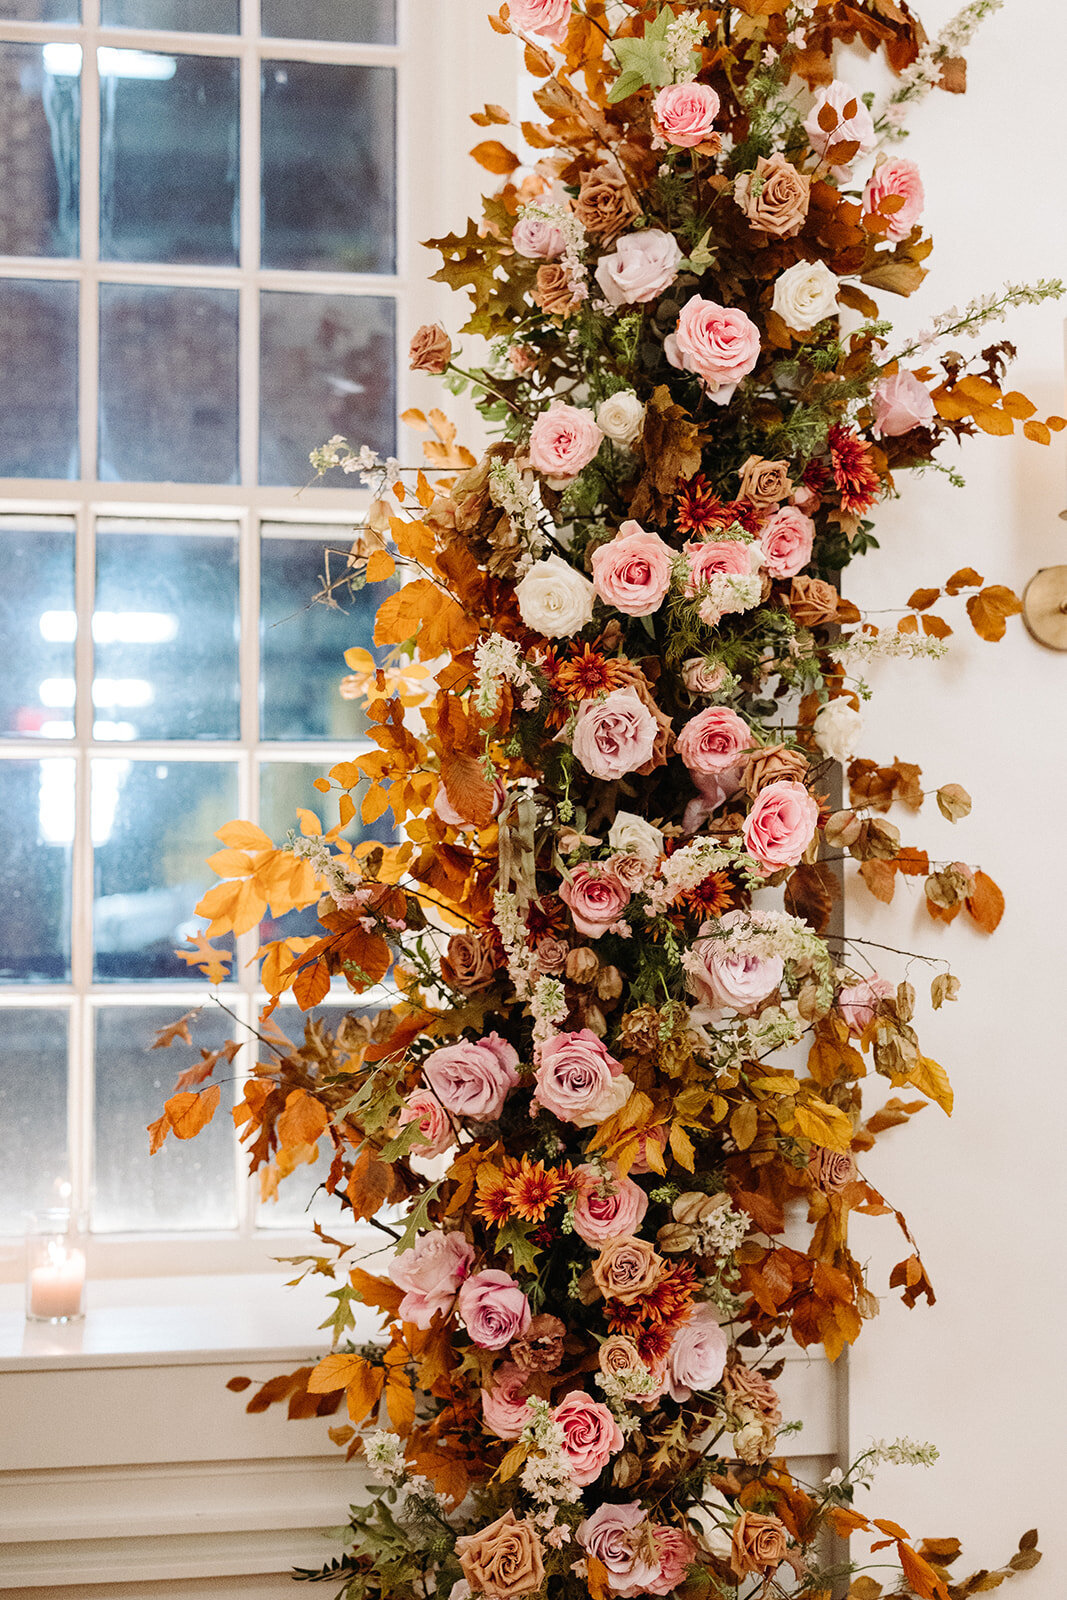 Artful asymmetrical floral wedding ceremony backdrop sets the autumnal hues of mauve, dusty rose, burgundy, terra cotta, and copper florals composed of roses, copper beech, delphinium, raintree pods, mums, and fall foliage. Design by Rosemary and Finch in Nashville, TN.